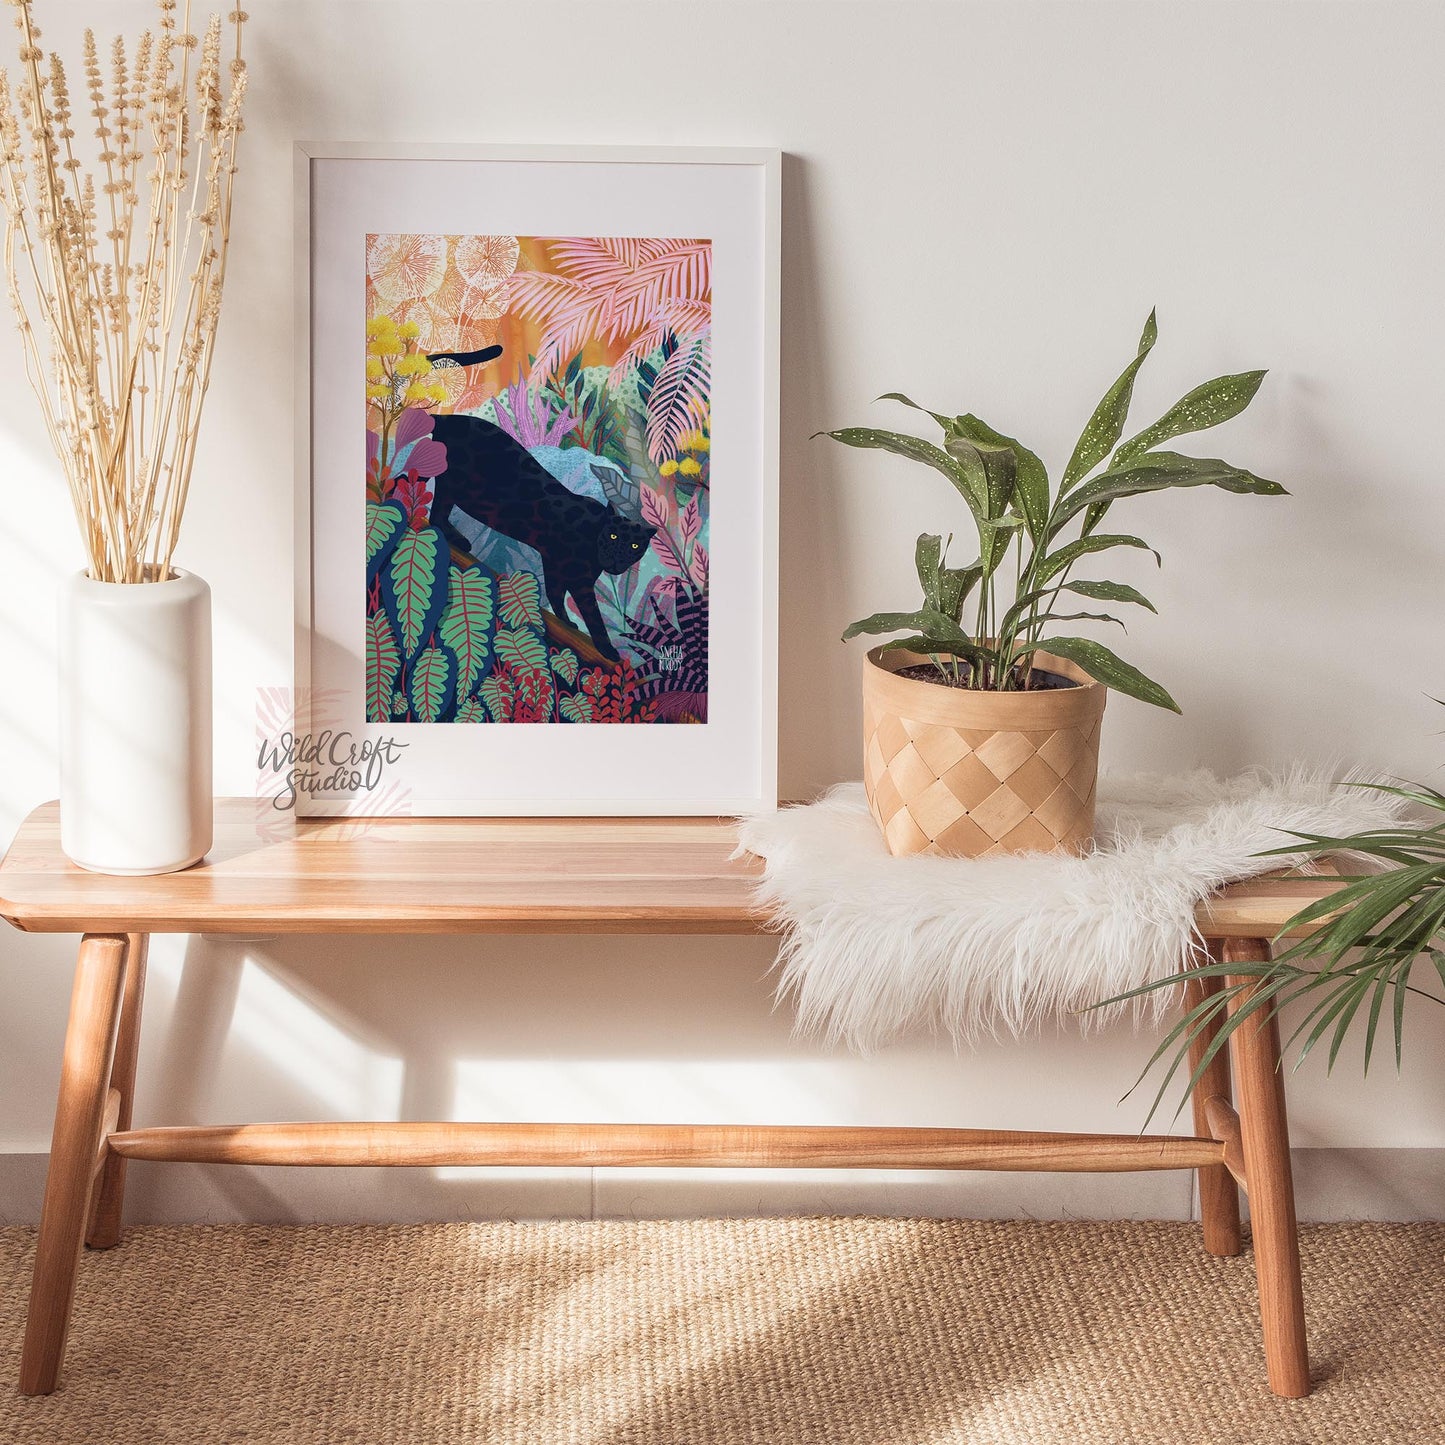 Black Panther in the Jungle - Animal Art Print